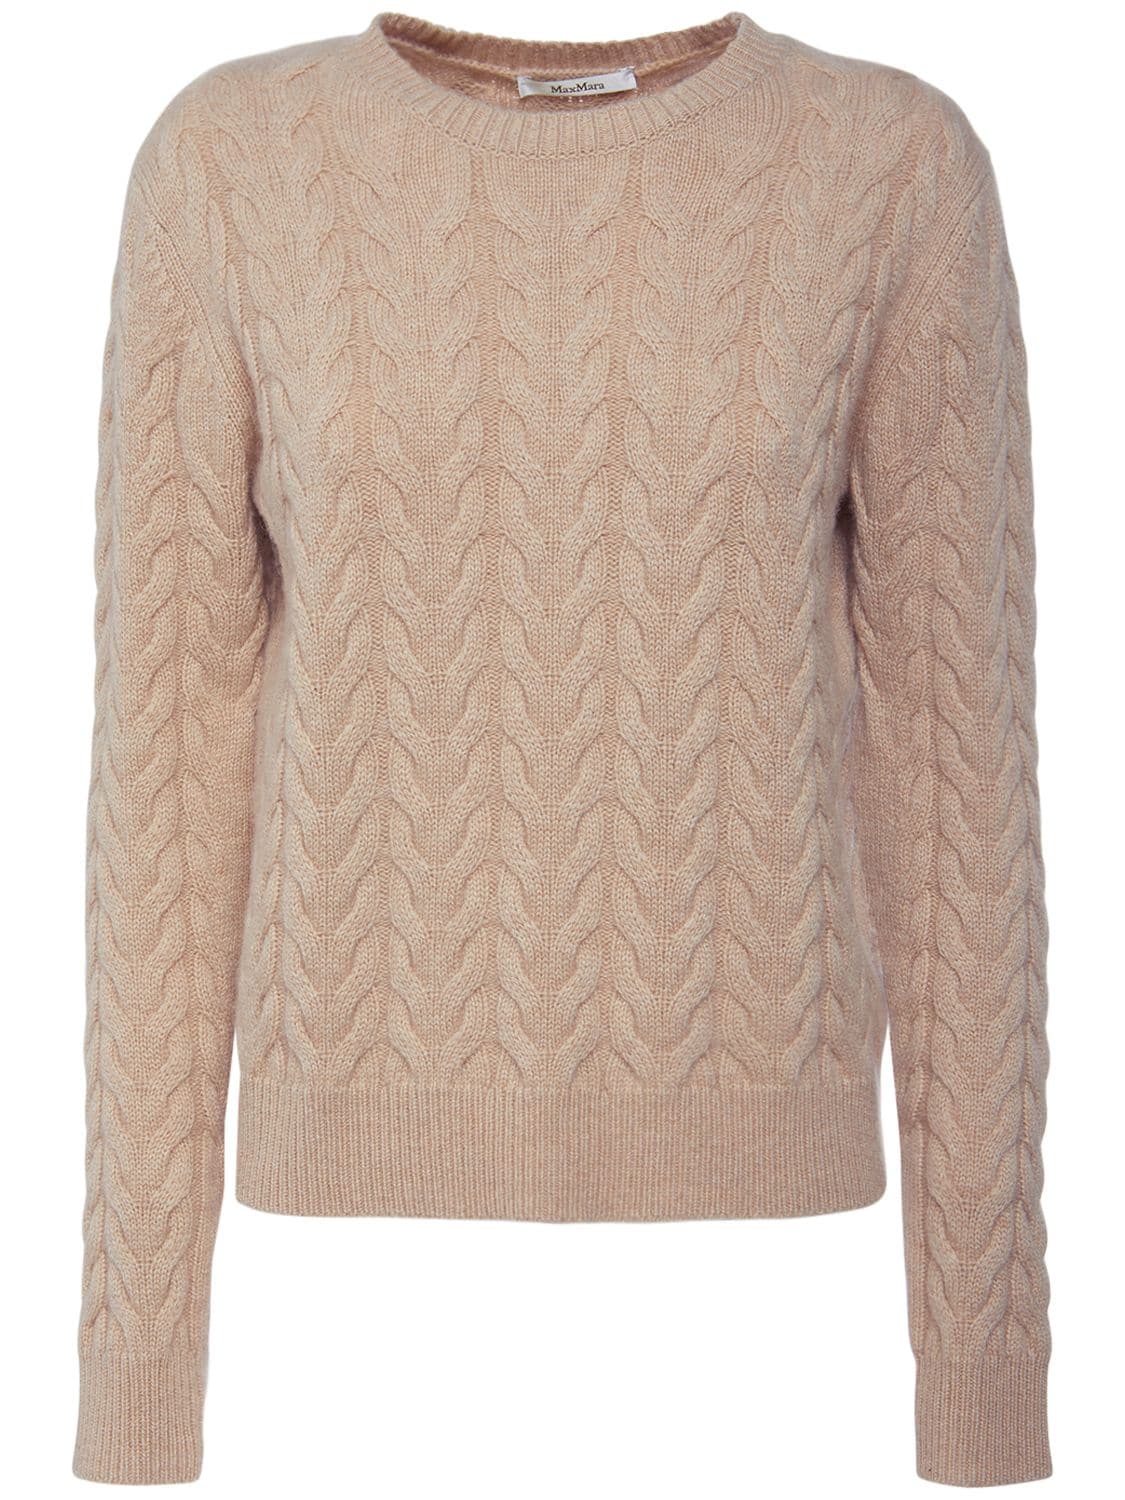 Max Mara Odessa Cable Knit Cashmere Sweater In Light Beige